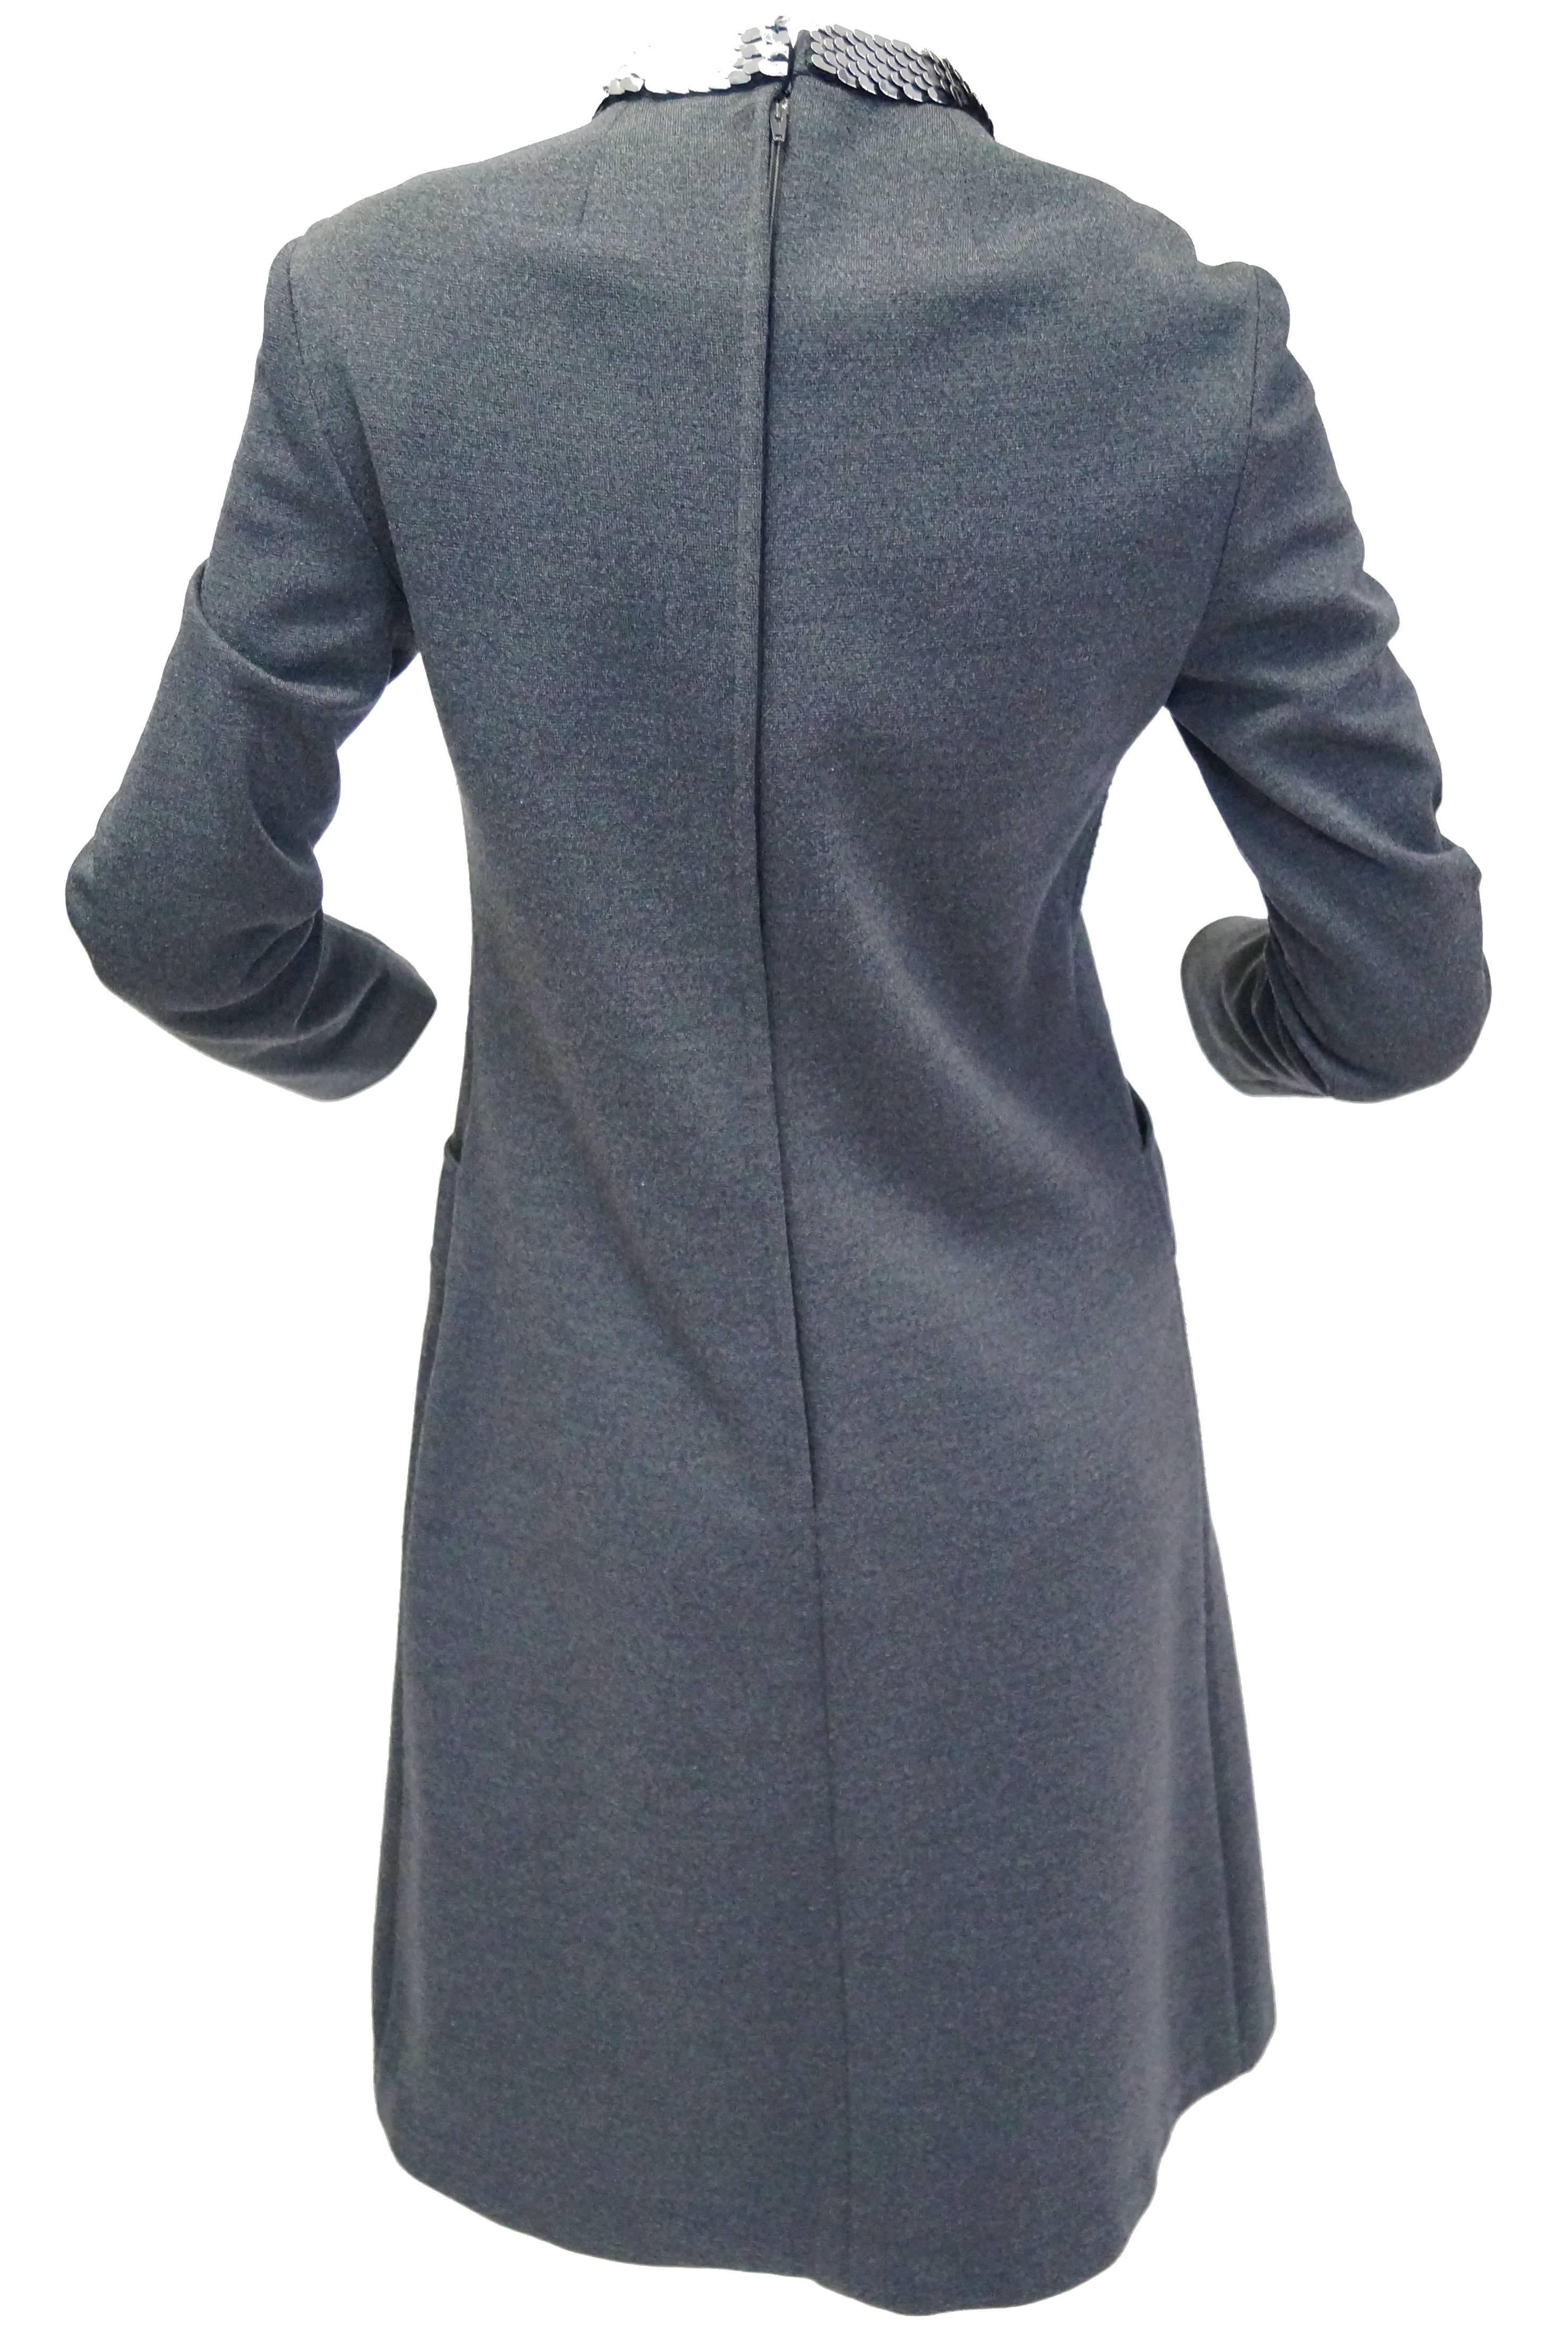 1970s Geoffrey Beene Space Gray Shift Dress with Metallic Details In Excellent Condition For Sale In Houston, TX